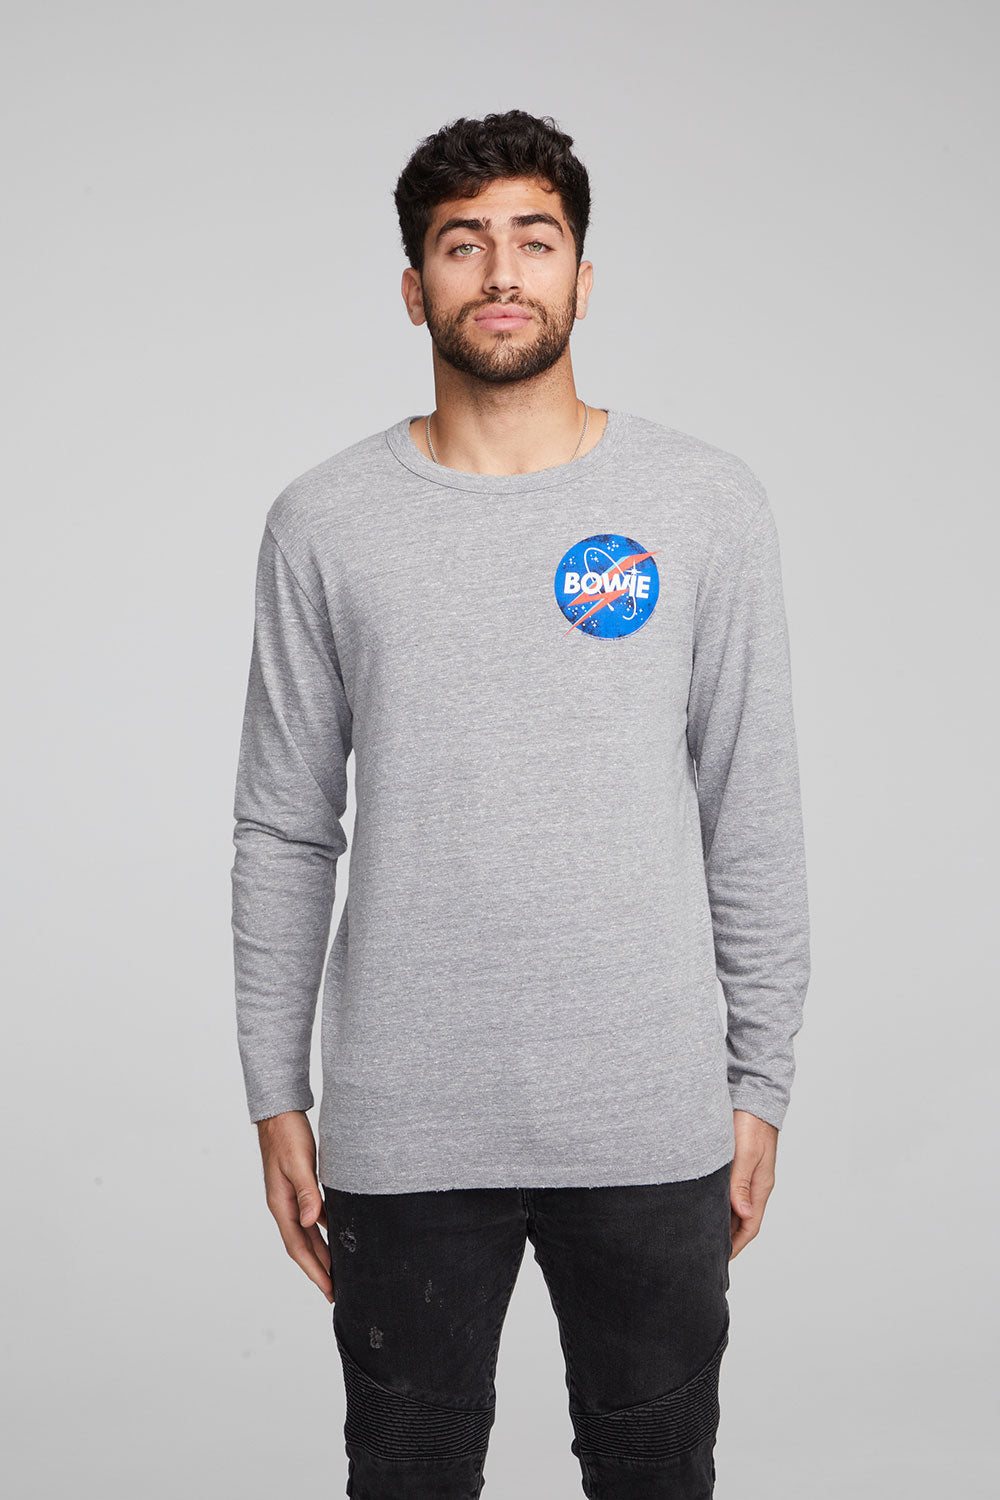 David Bowie Outer Space Long Sleeve Crew MENS chaserbrand